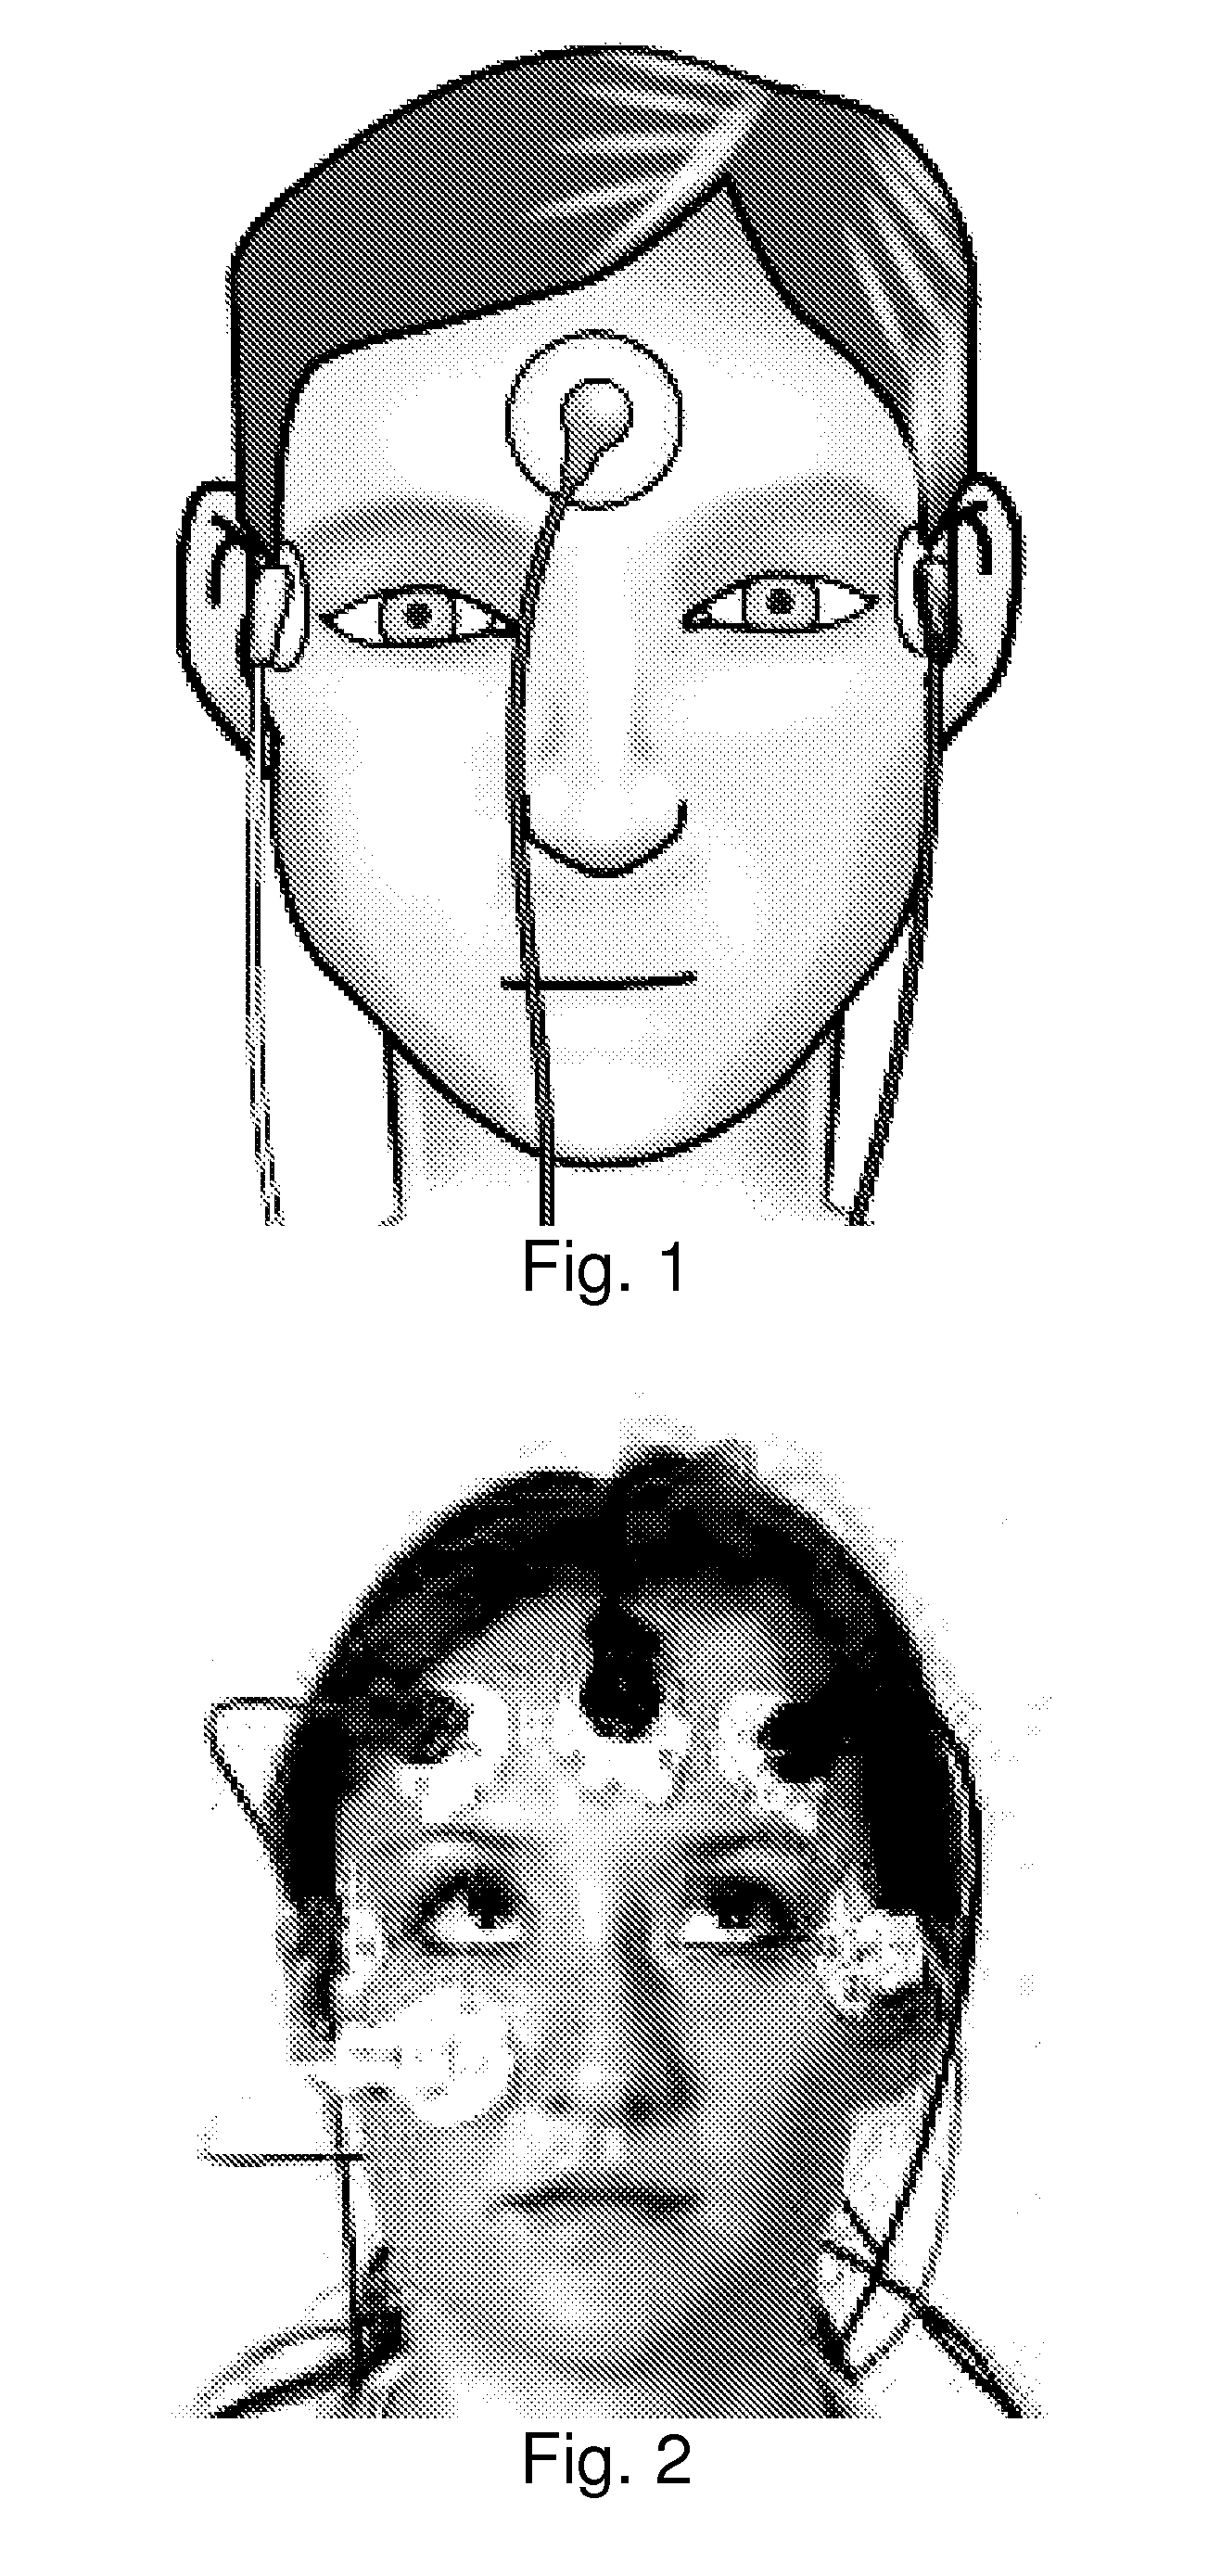 Wearable head-mounted, glass-style computing devices with eog acquisition and analysis for human-computer interfaces